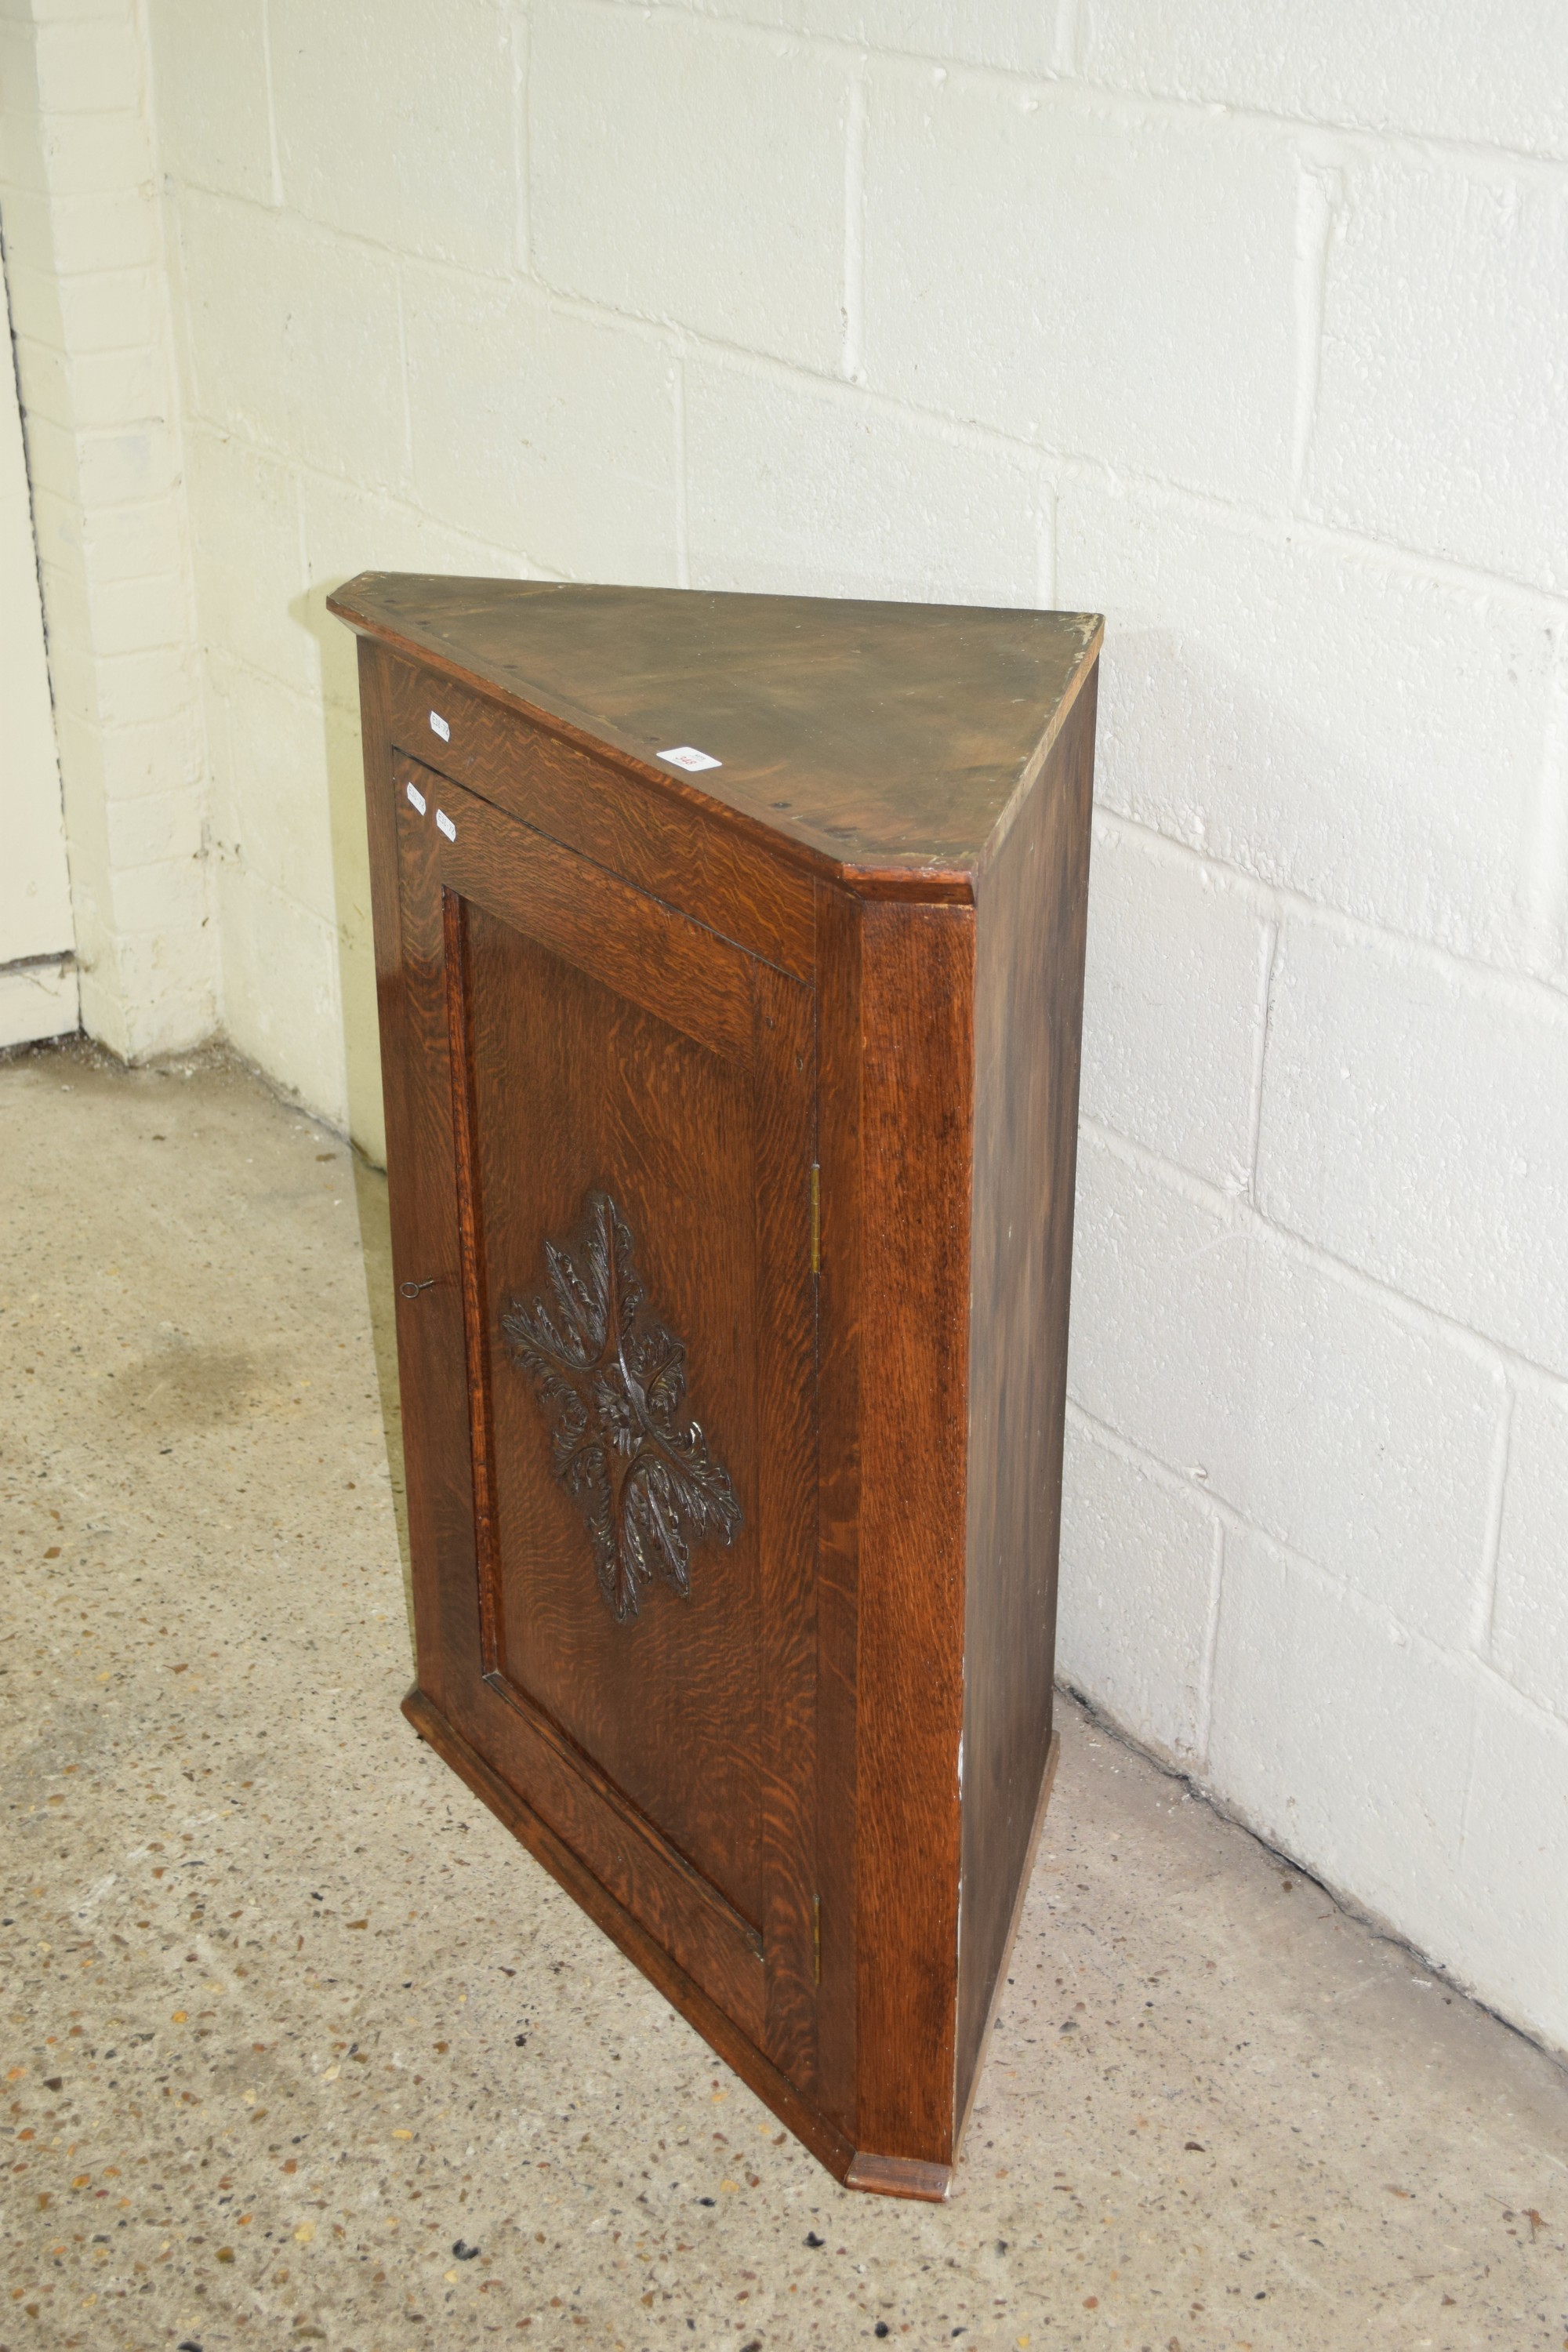 OAK CORNER WALL CUPBOARD WITH CARVED DECORATION, APPROX WIDTH 70CM MAX - Image 2 of 2